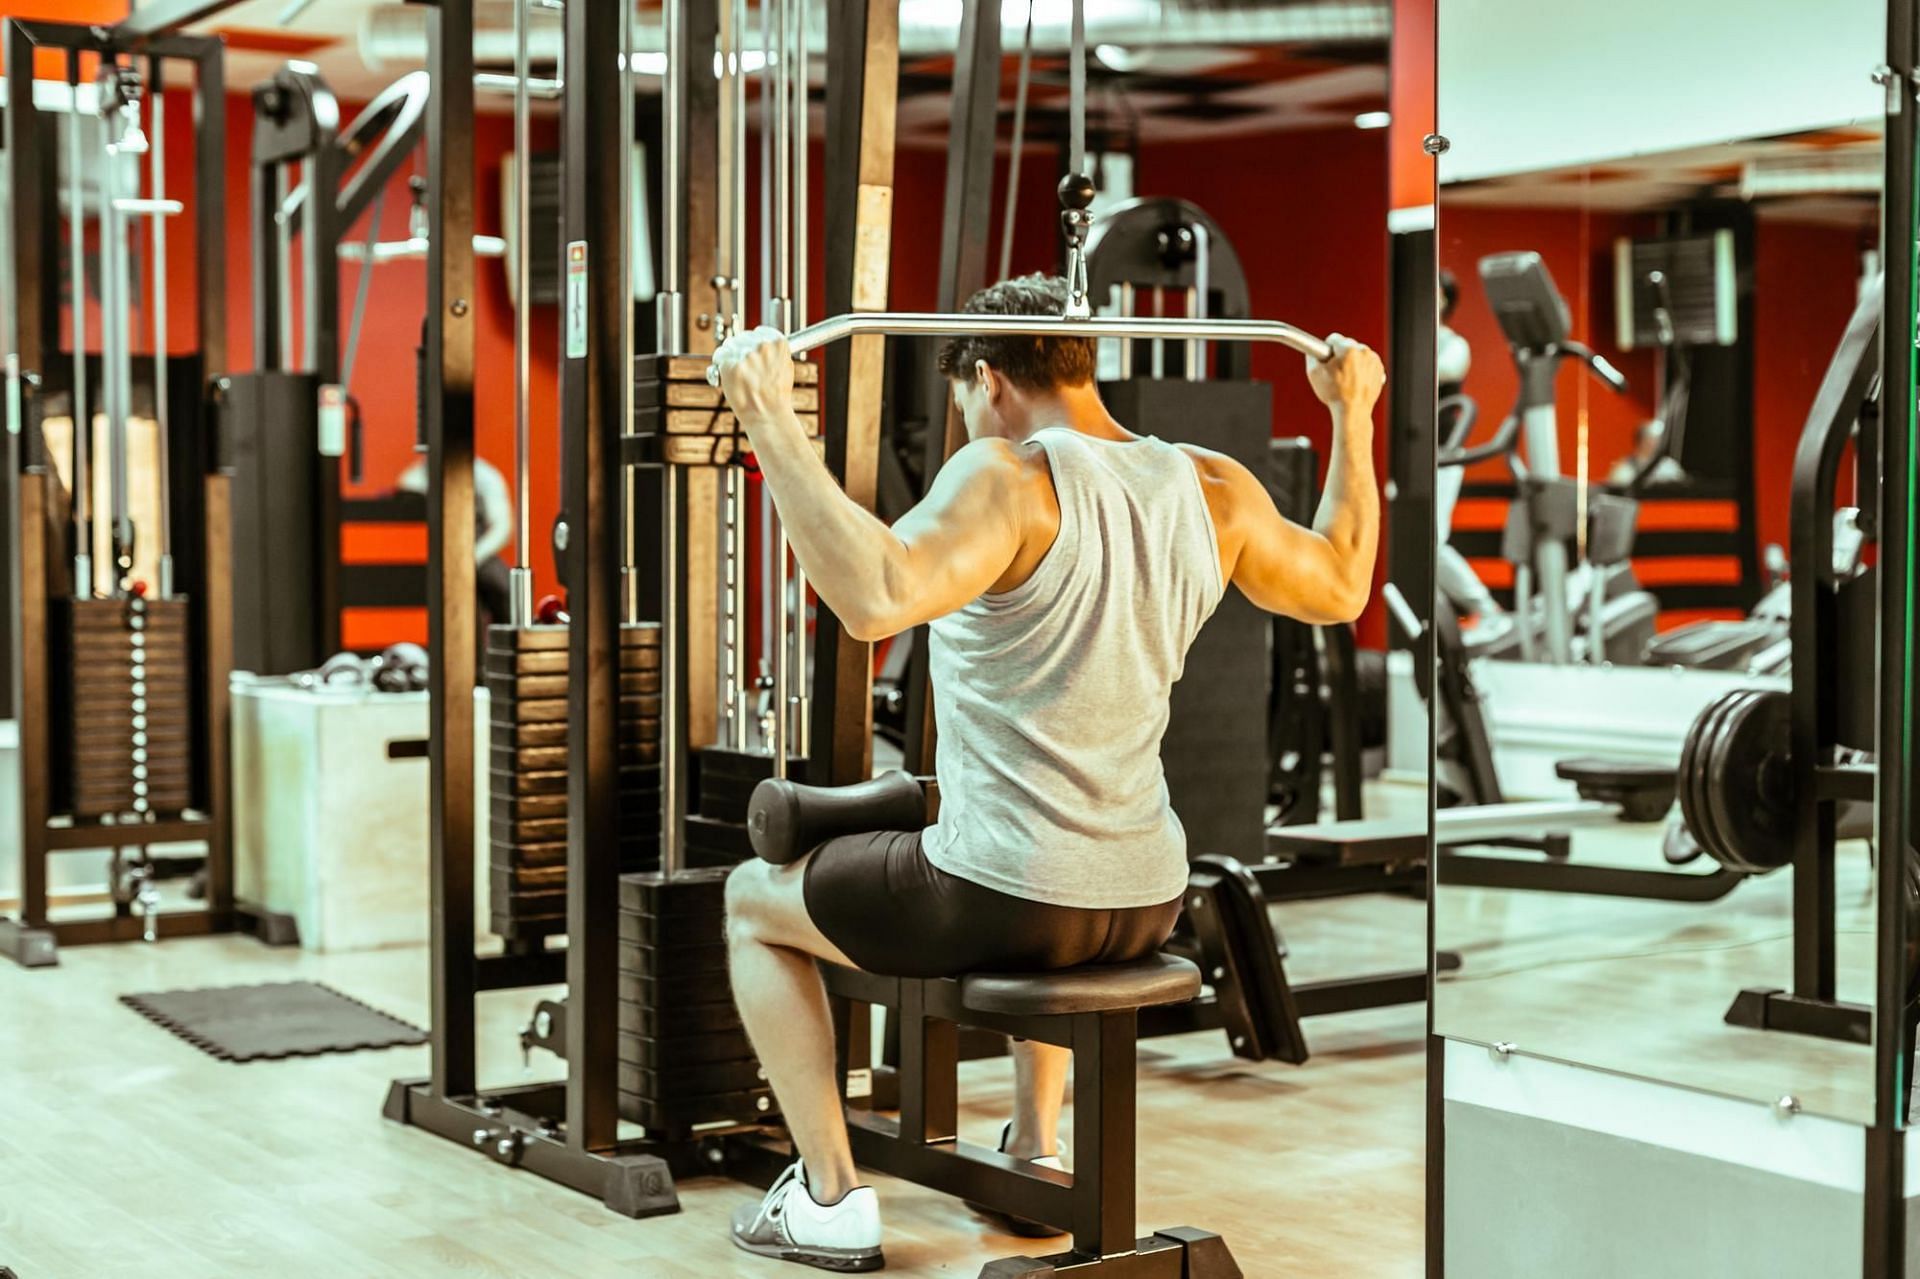 Lat pulldowns are an effective muscle building exercise.  (Image credits: Freepik)